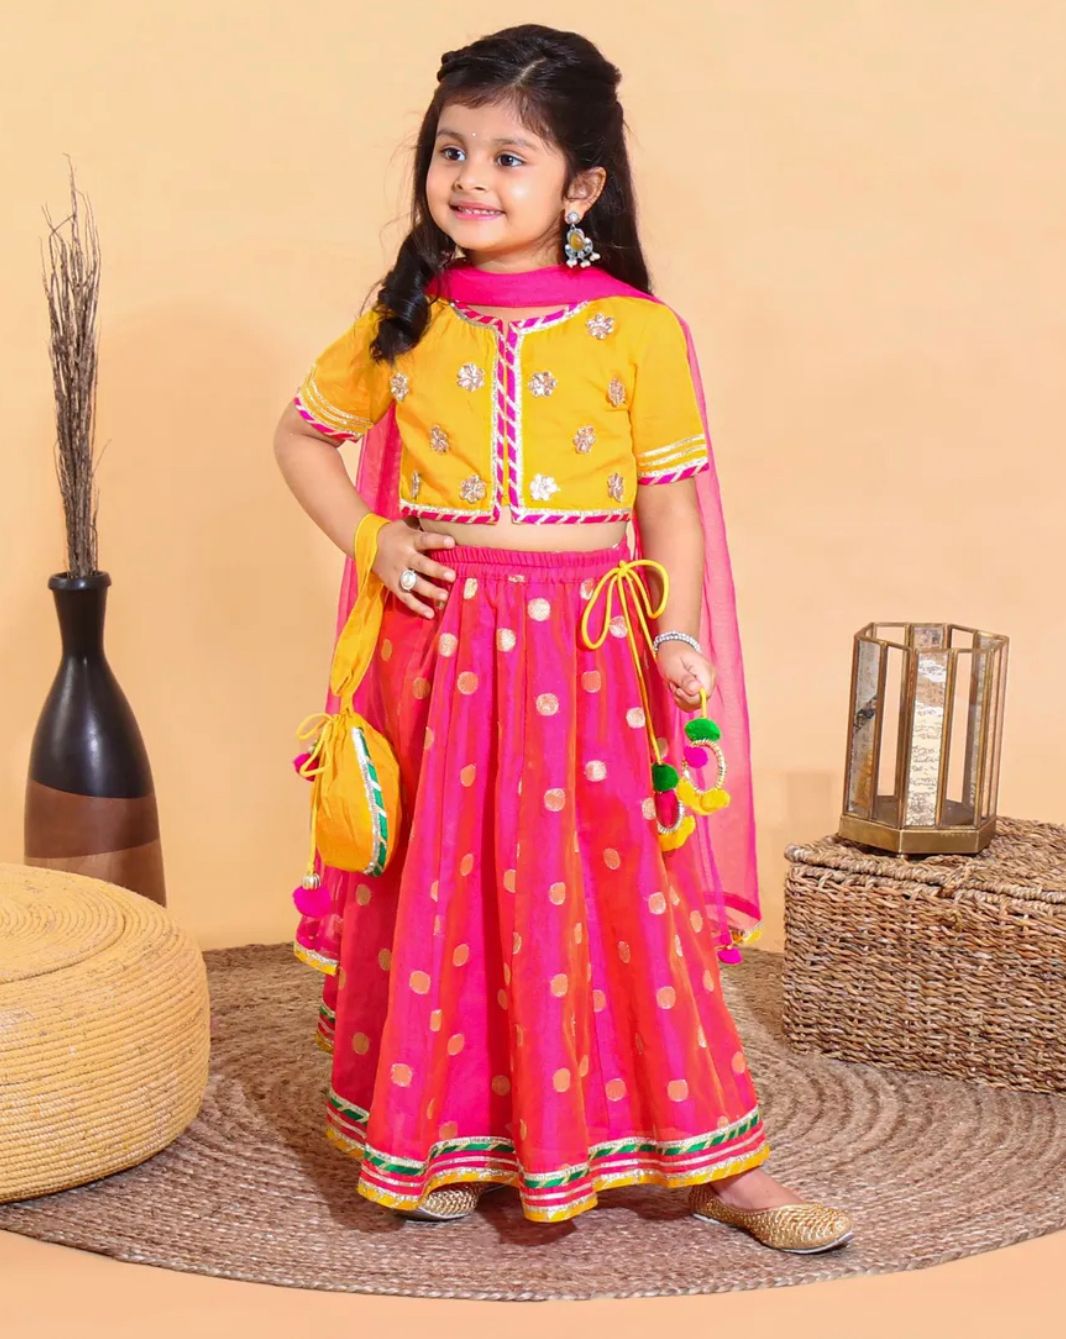 Make Ethnic Wear Fun For Your Little Girl With These Gorgeous Lehengas